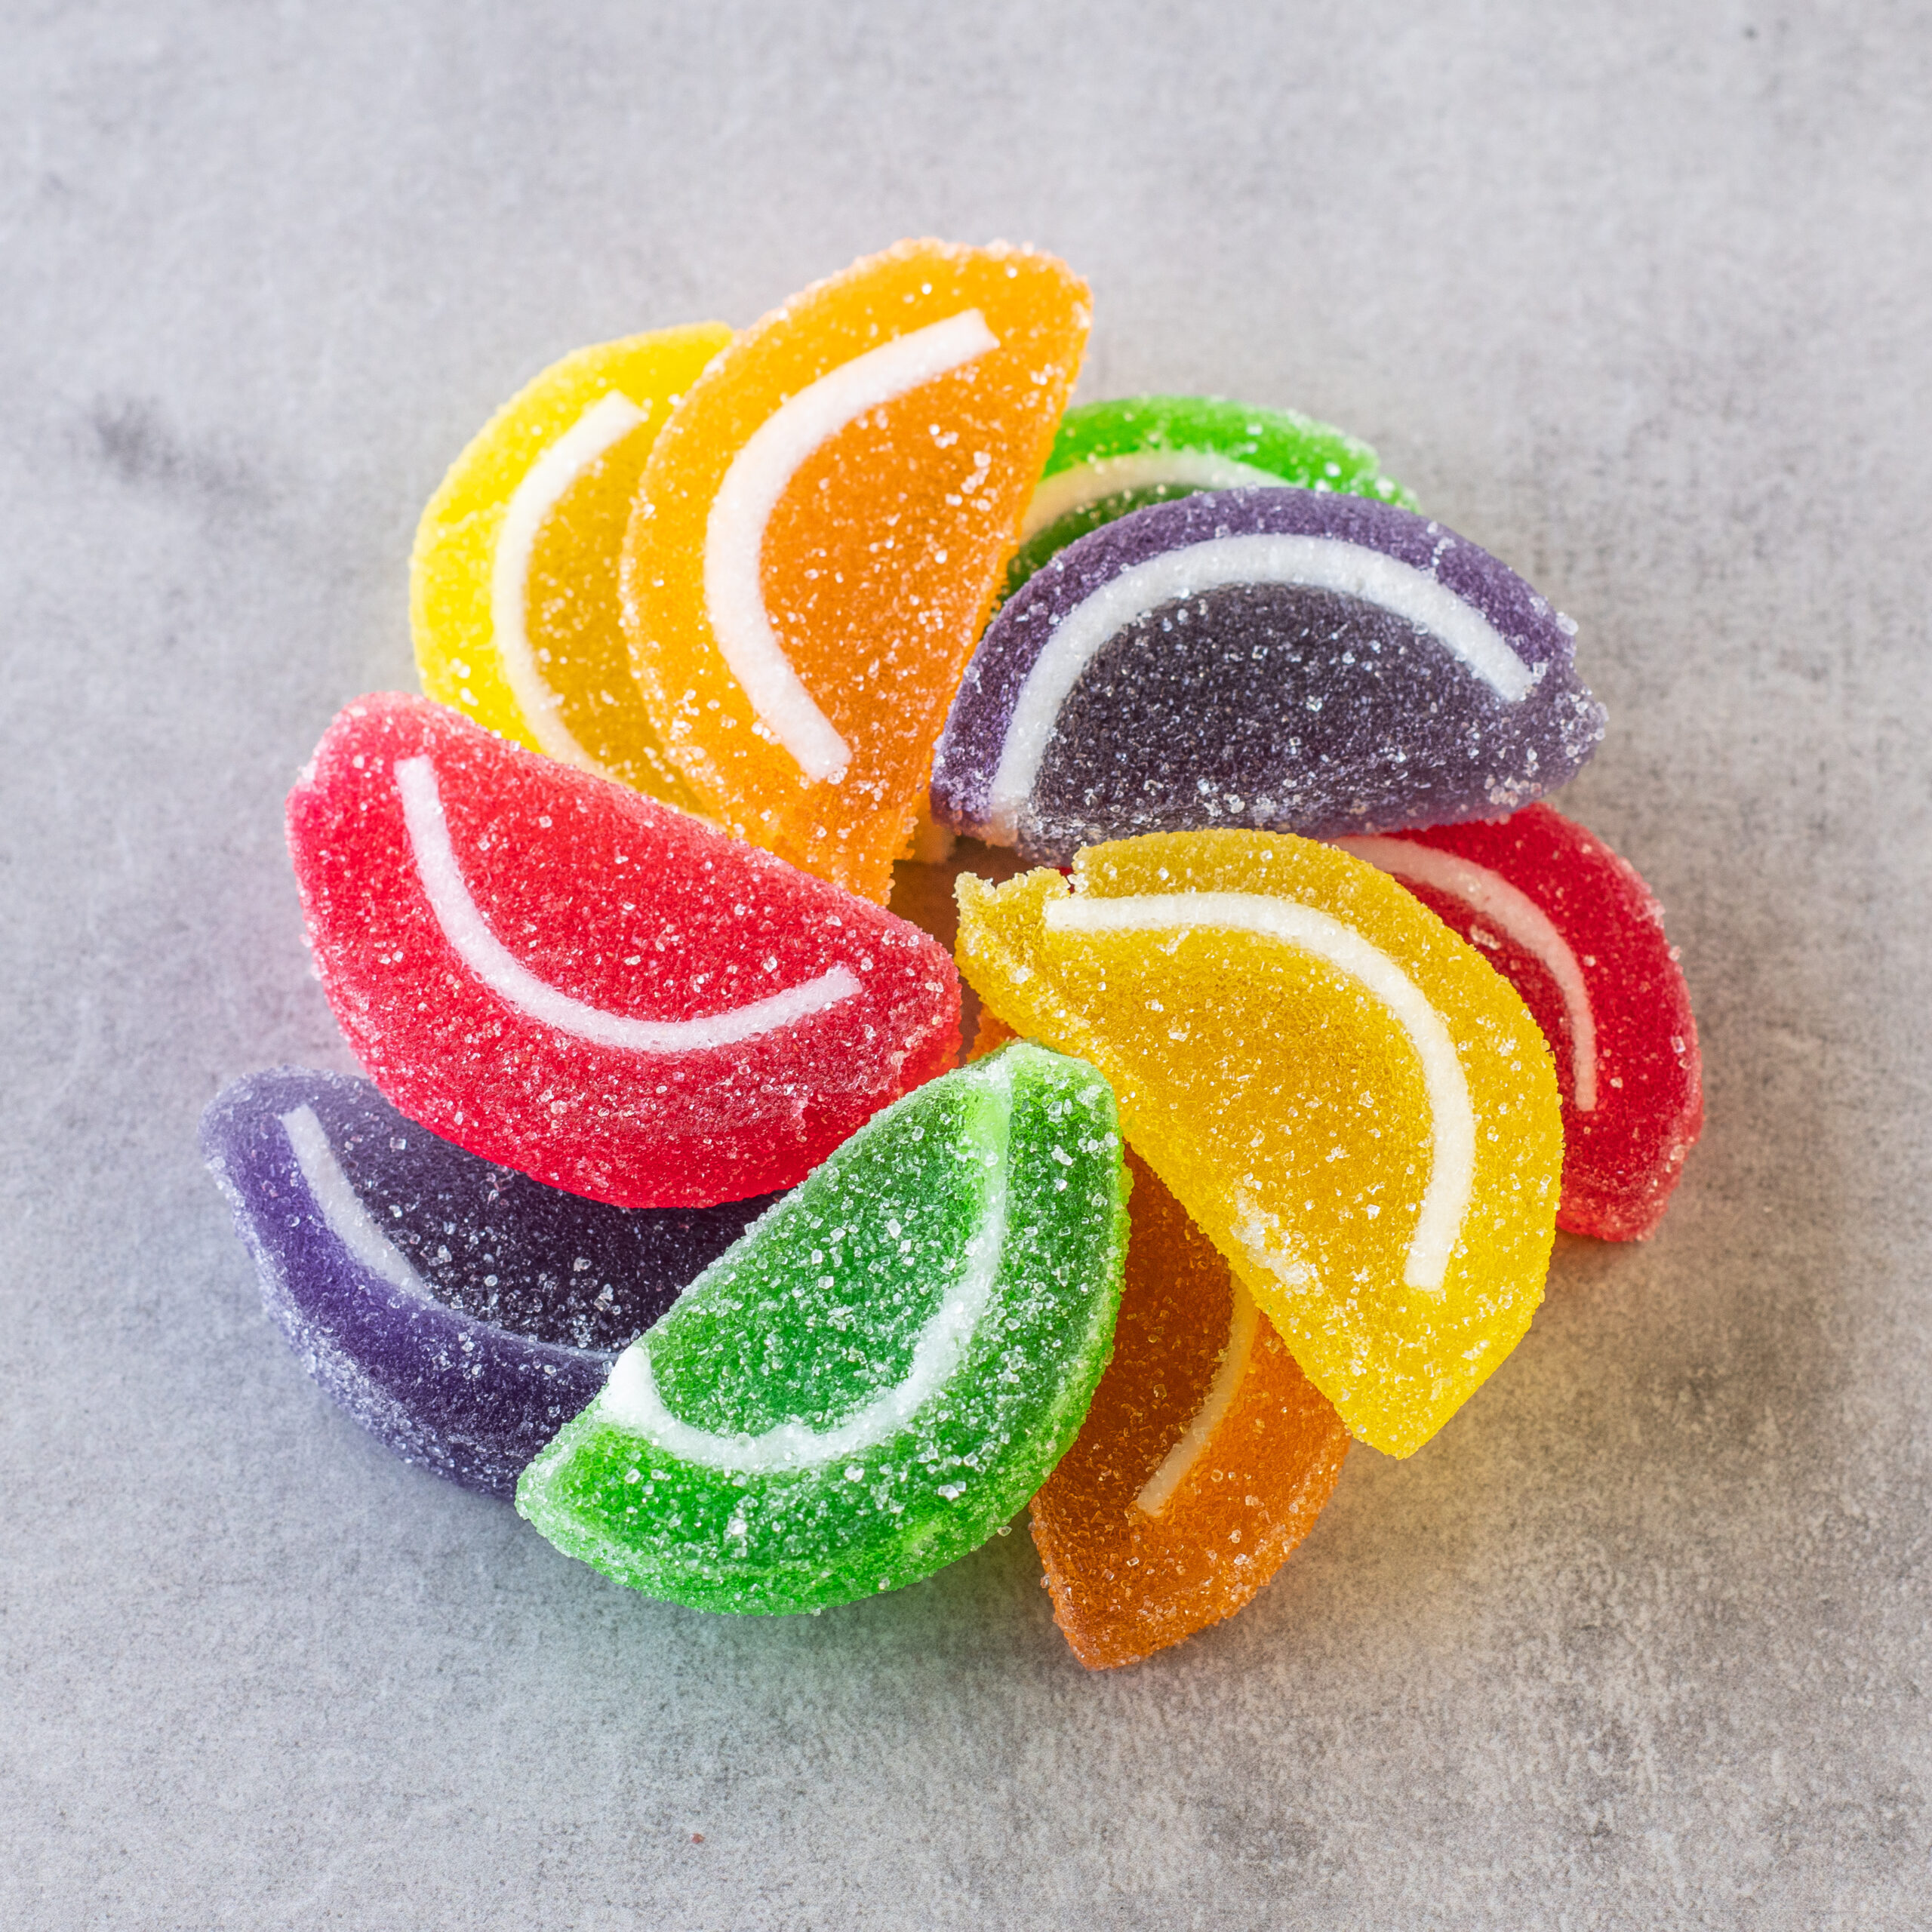 Jelly Fruit Slices - California Gourmet Nuts Online Shop